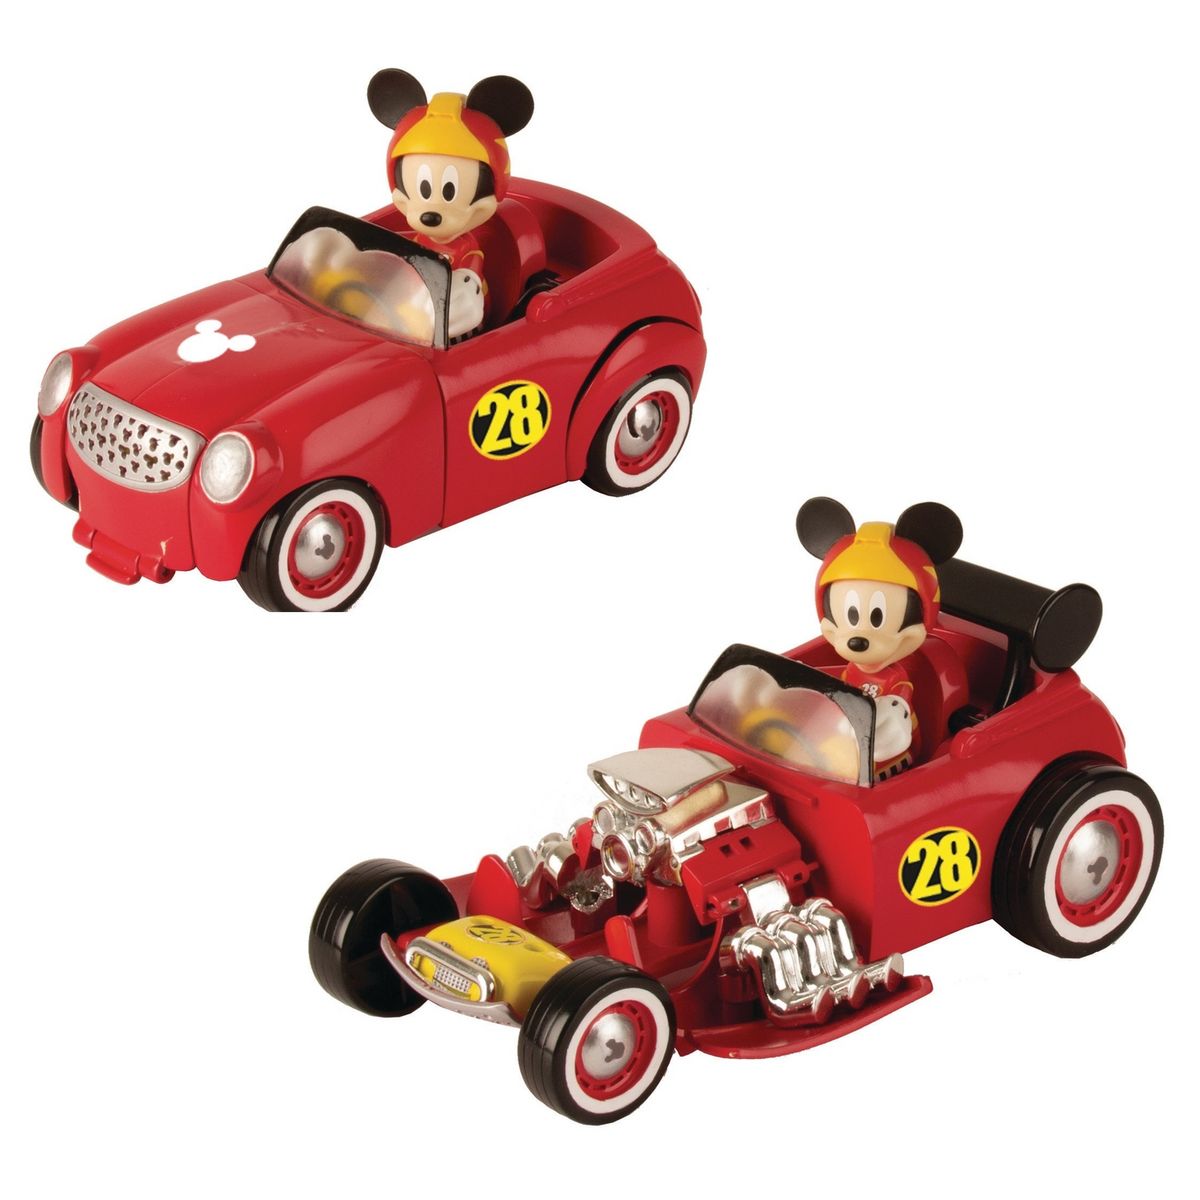 IMC TOYS Véhicule transformable + une figurine Mickey - Mickey et ses amis  pas cher 